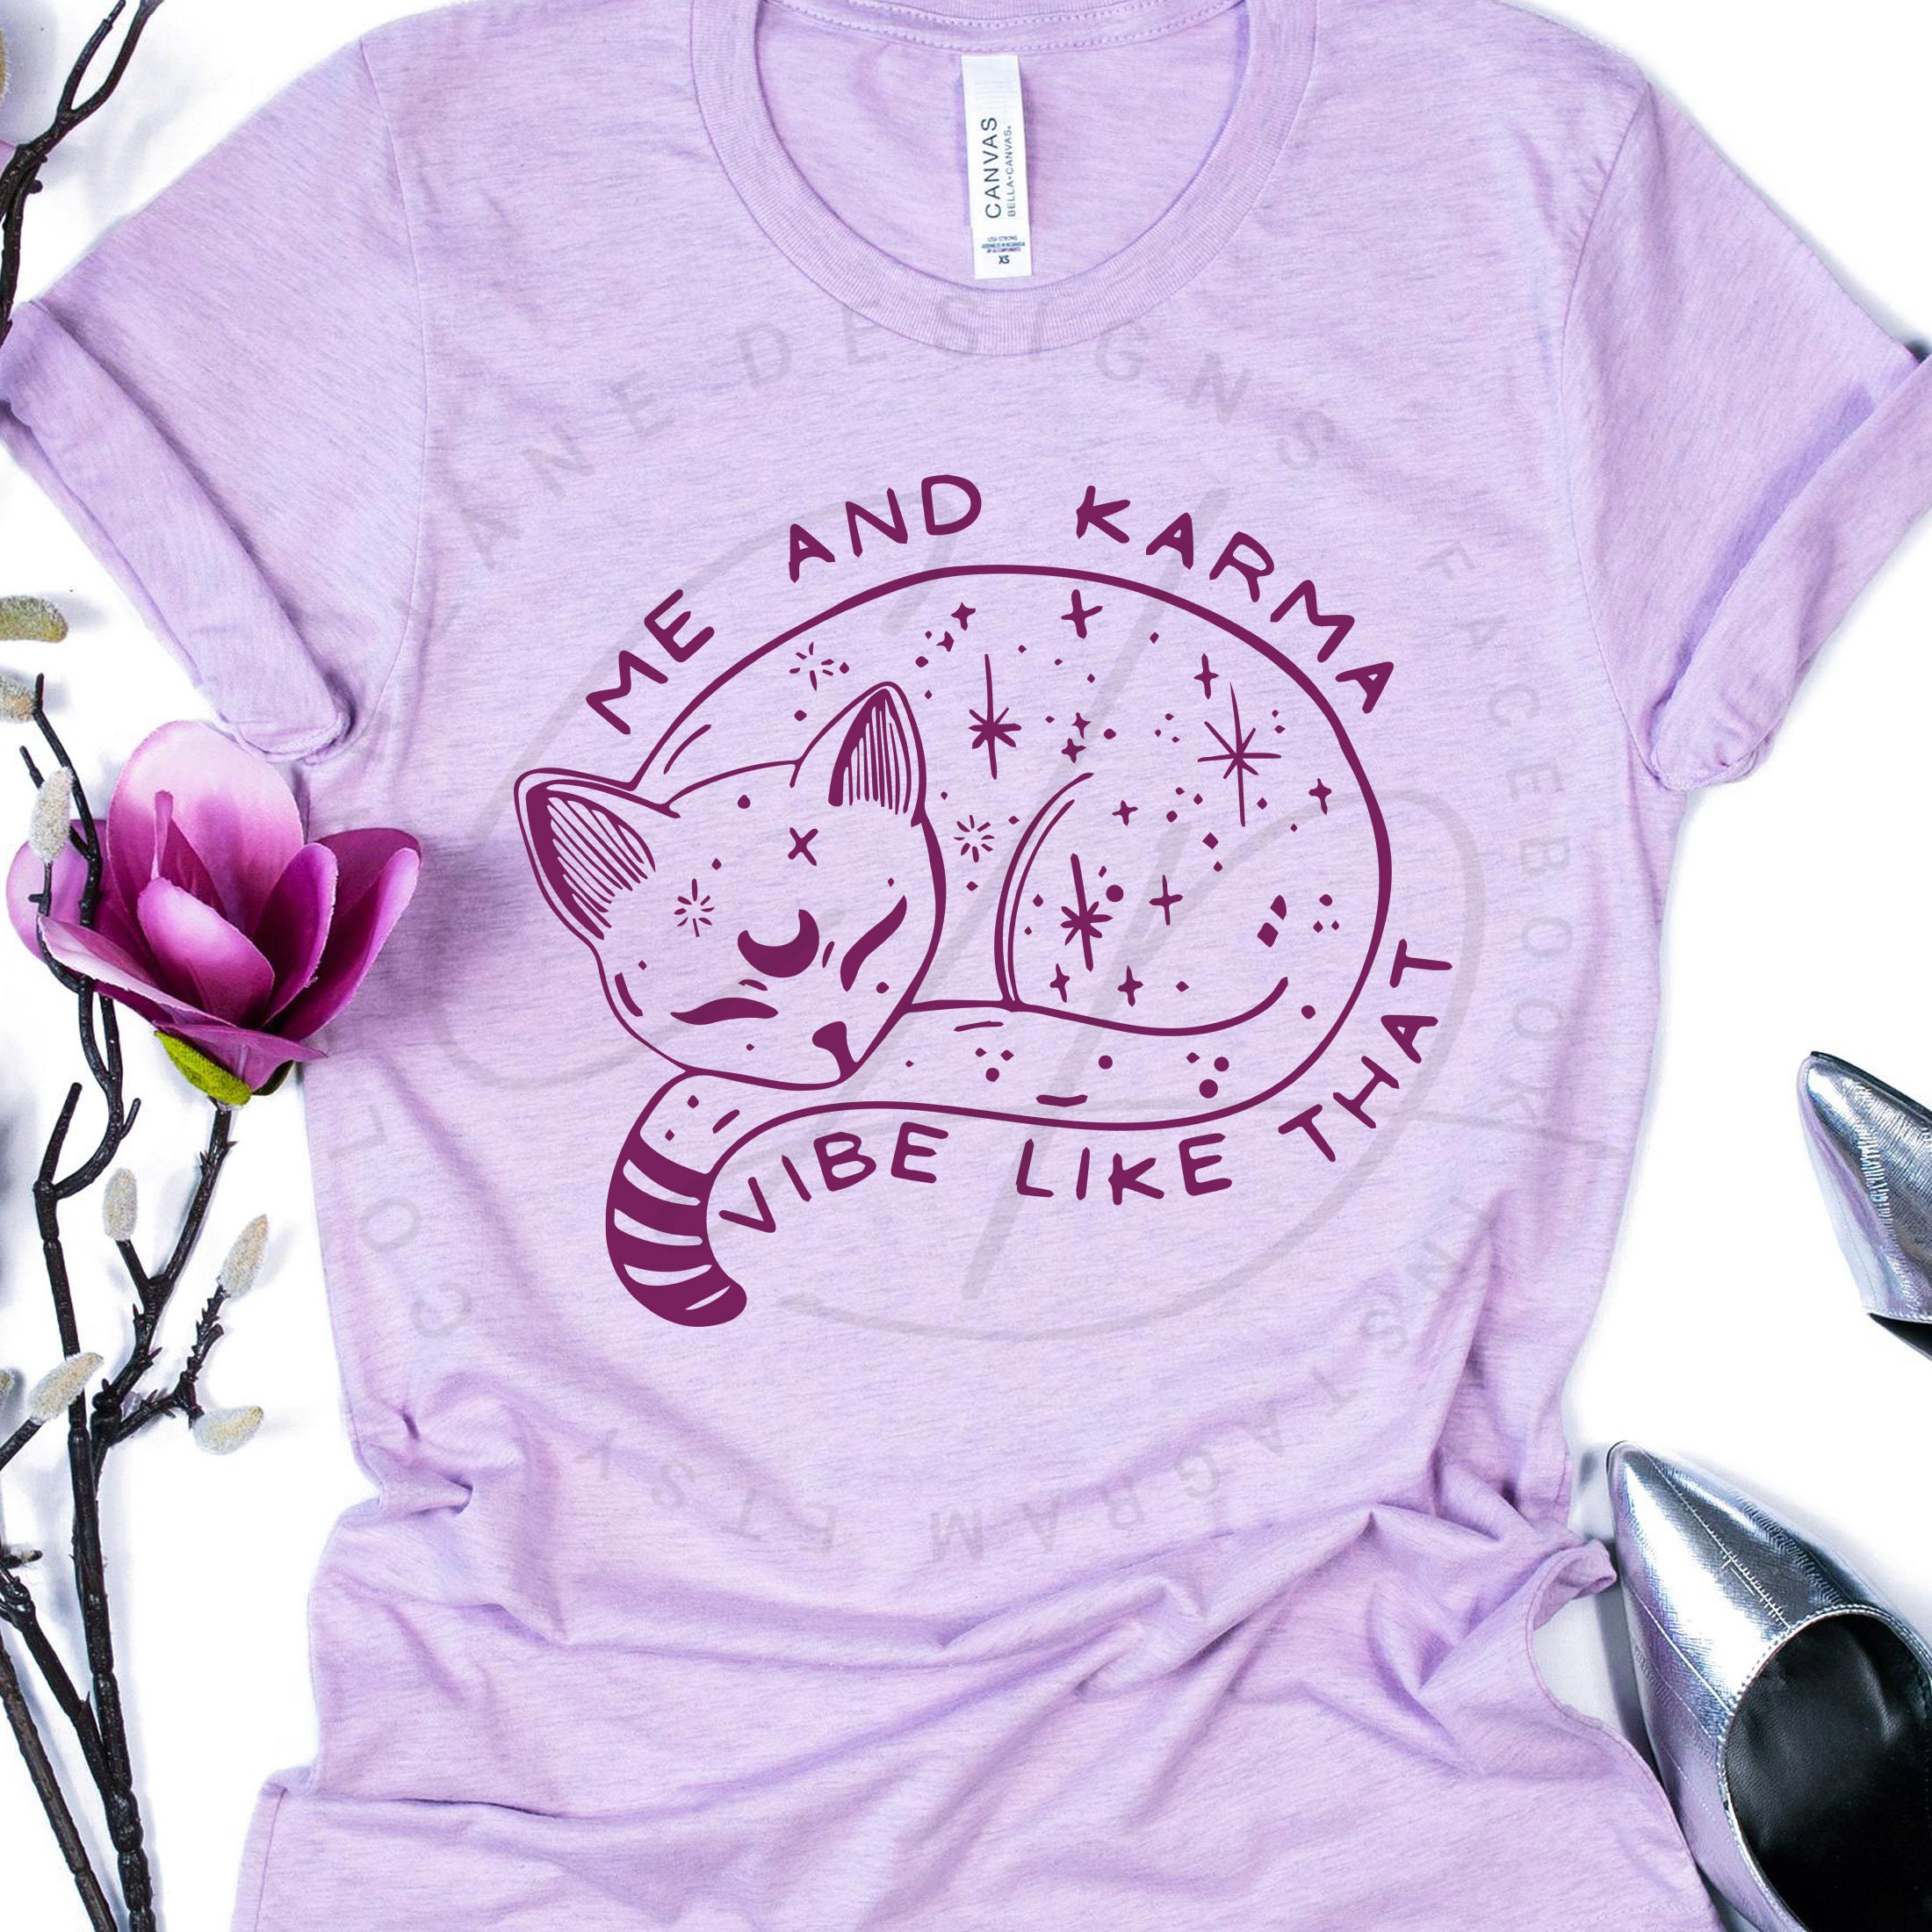 its the super kitty call! —  Shirt designs (1 , 2 , 3 , 4